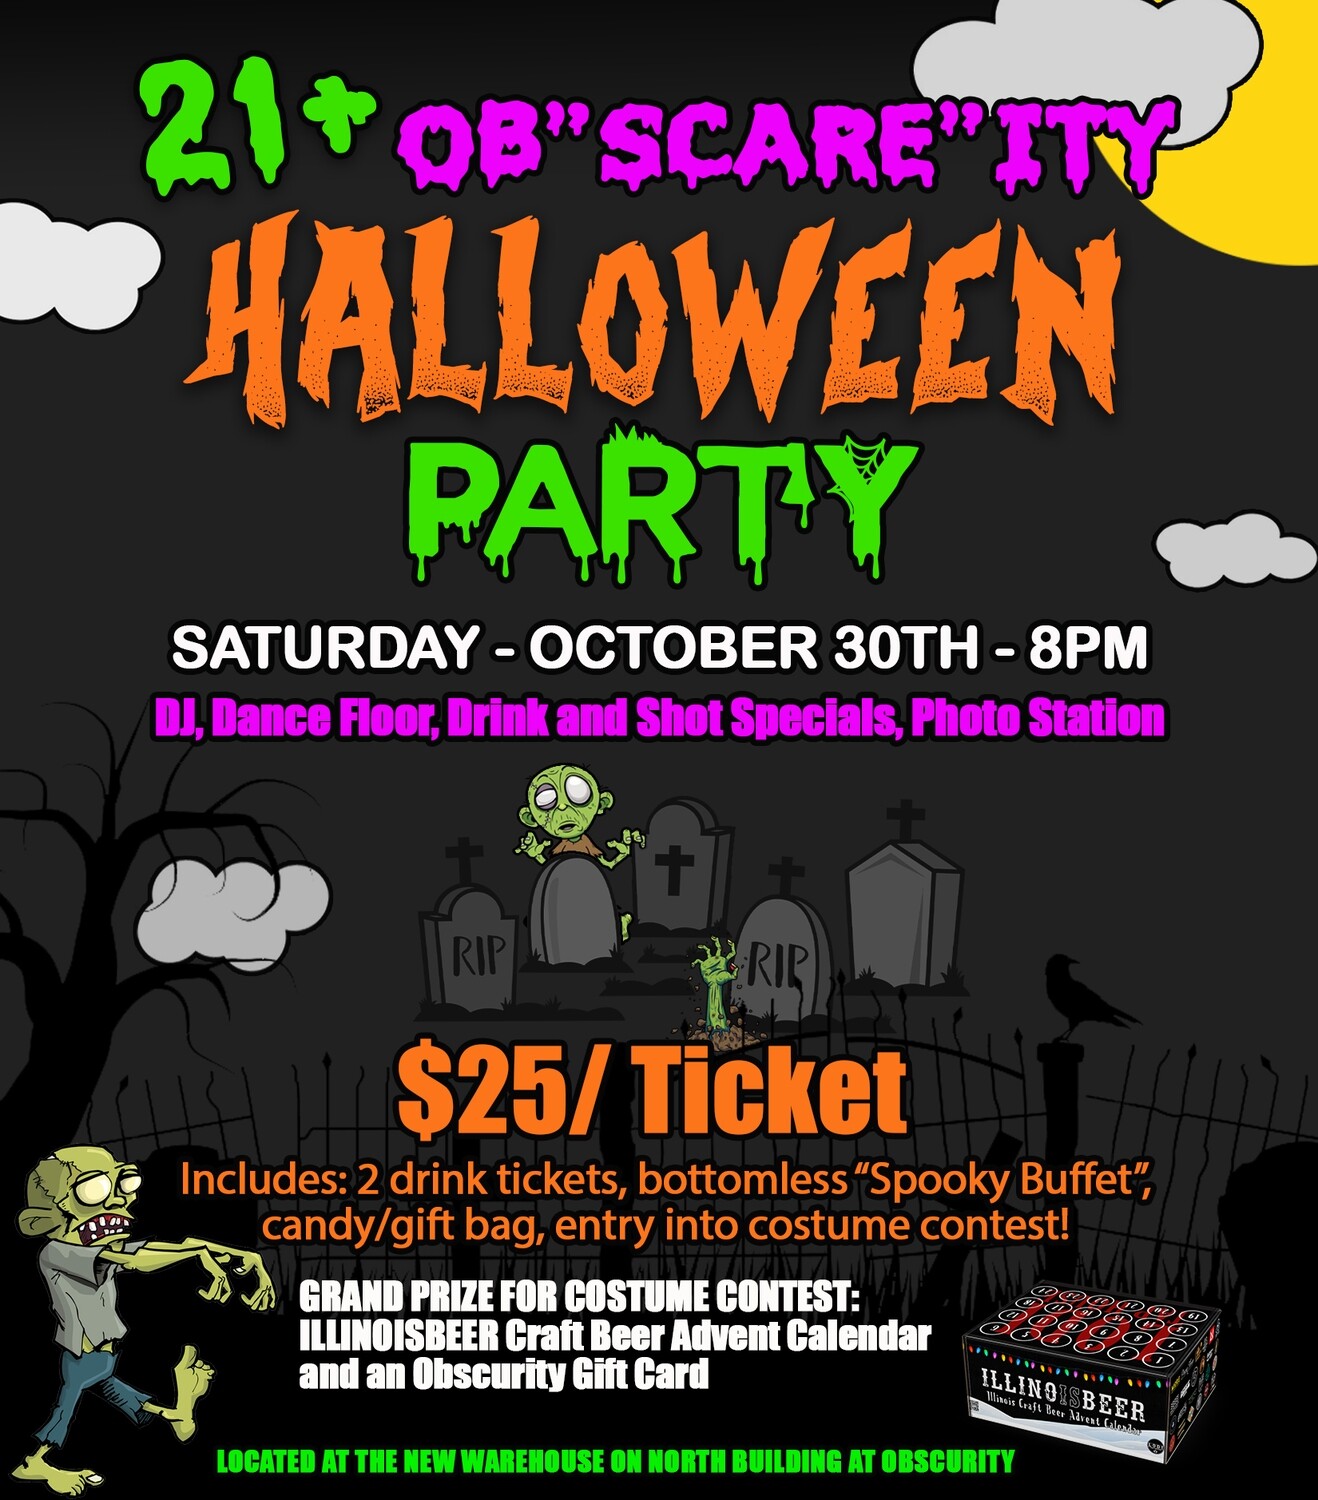 21+ OB'SCARE"ITY Halloween Party!